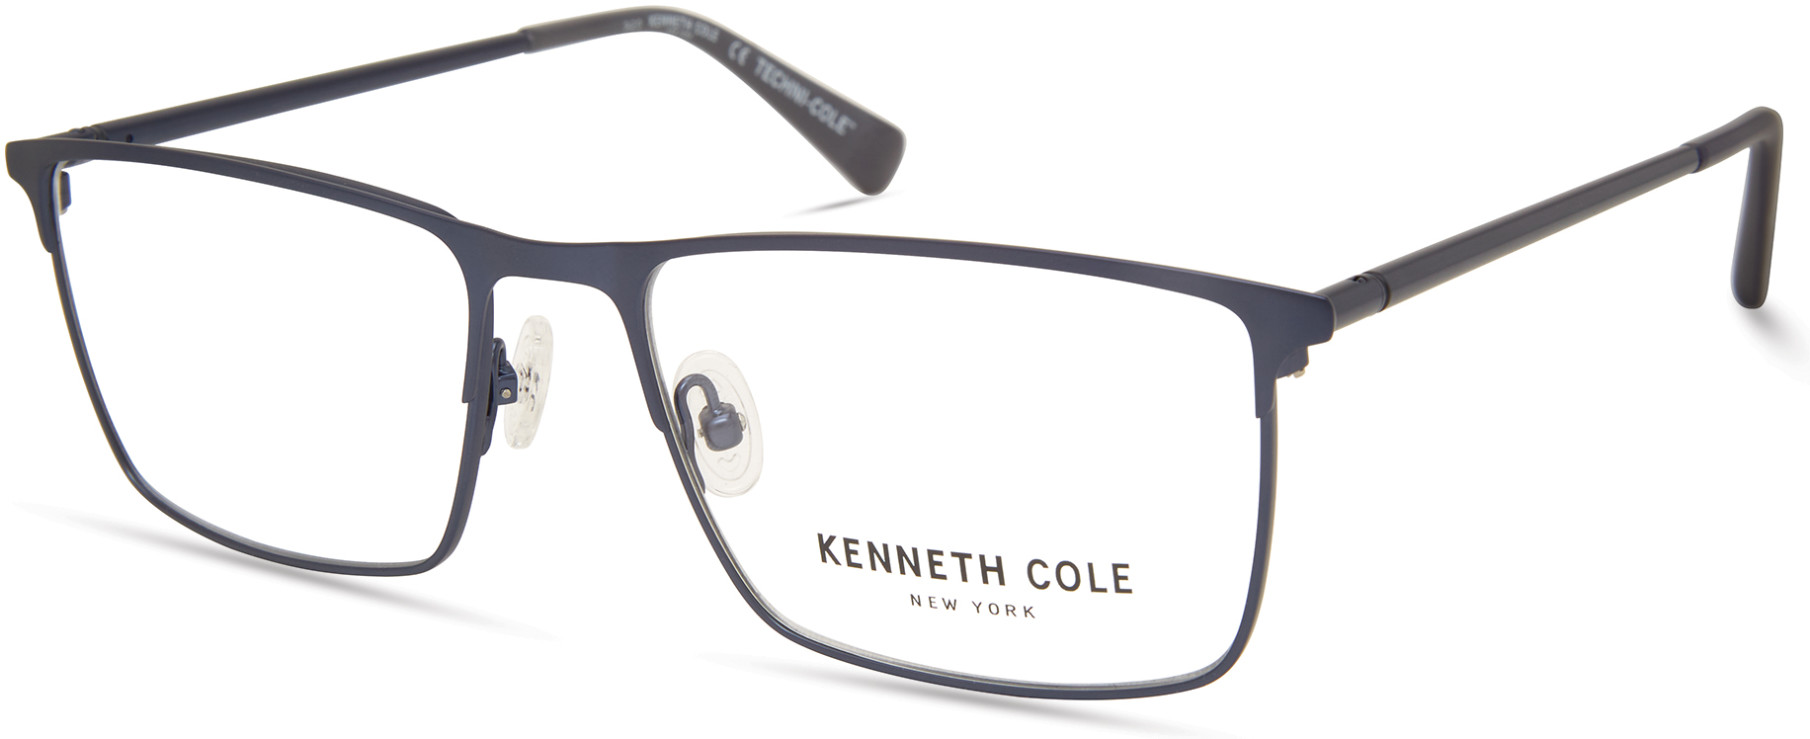 KENNETH COLE NY 0323 091